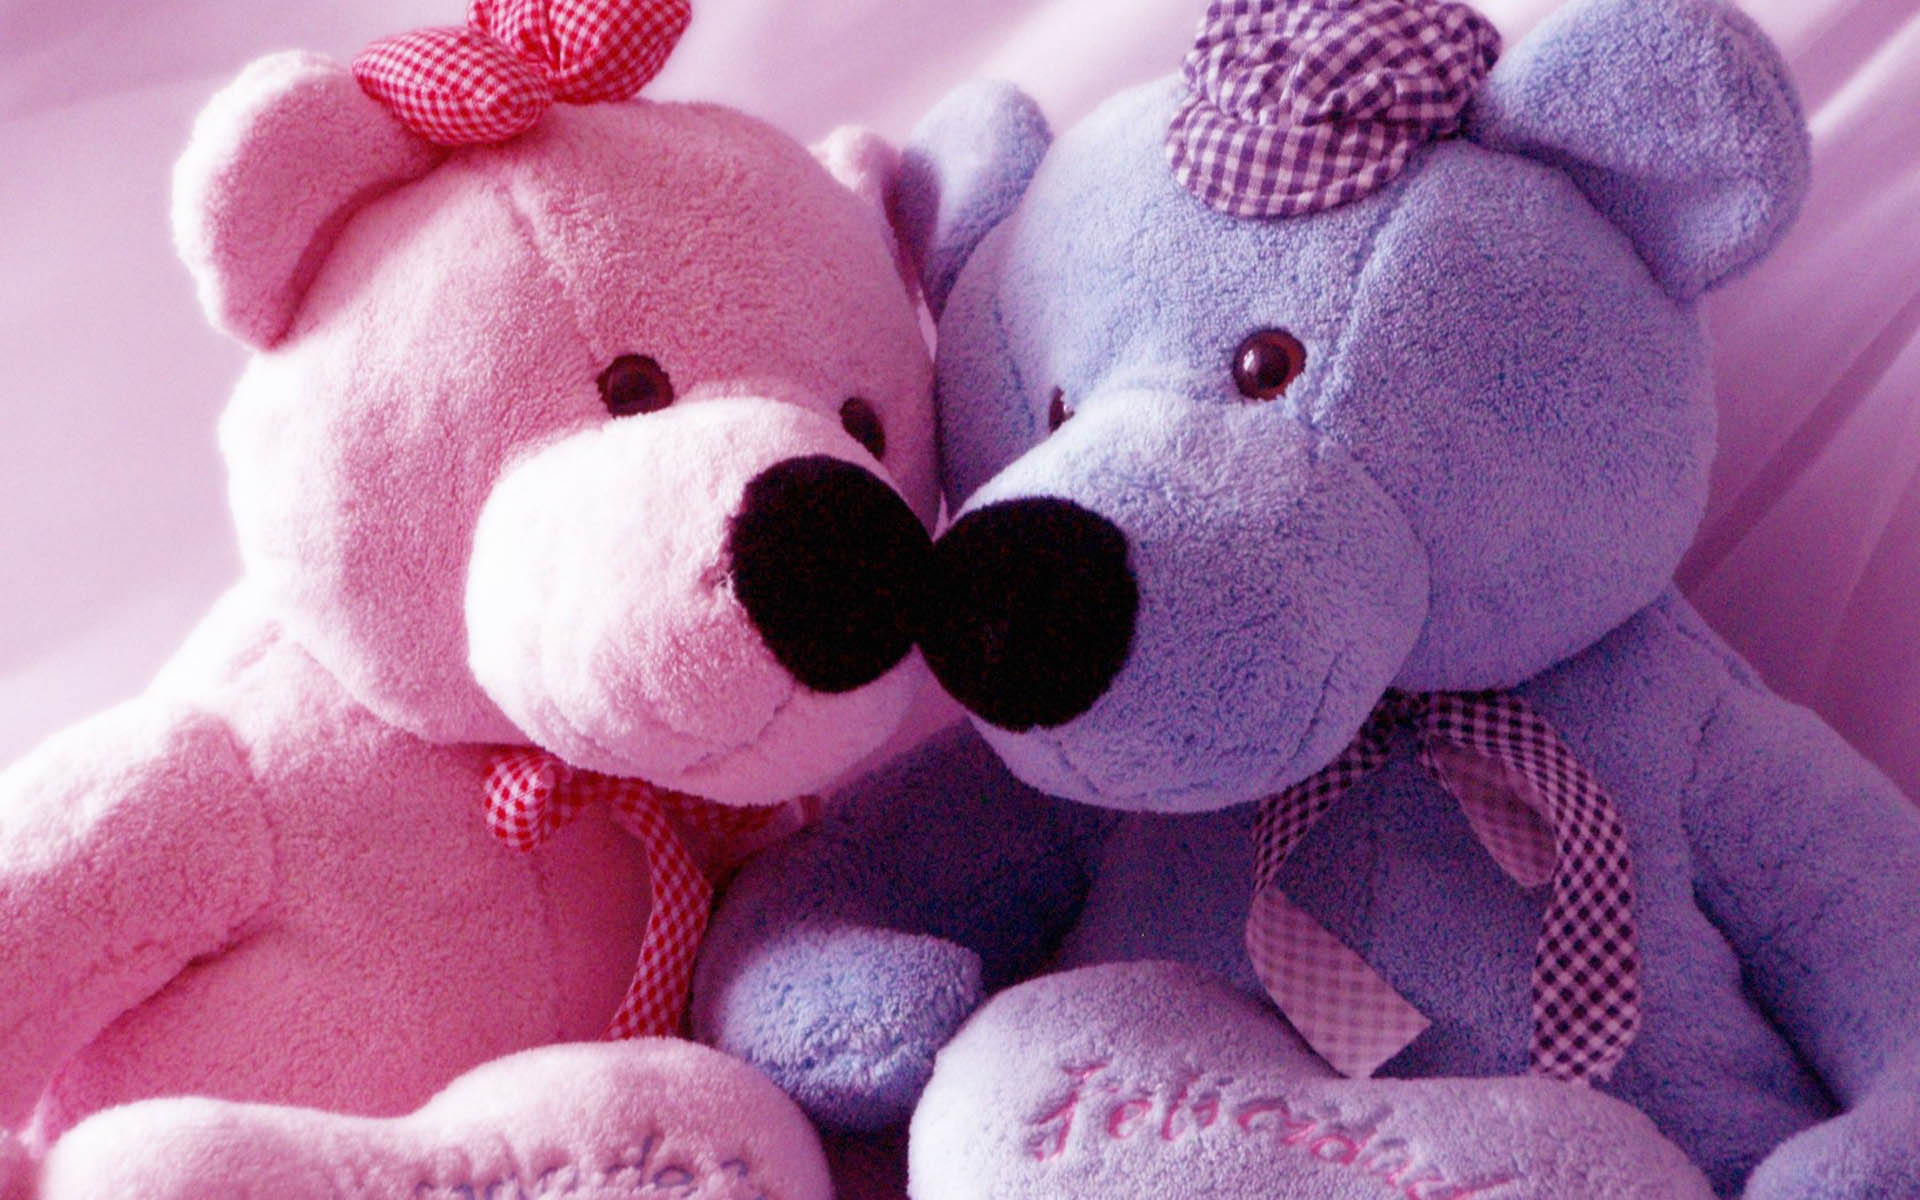 Download 100 Lovely Teddy Bear Wallpaper Images The 1920x1200